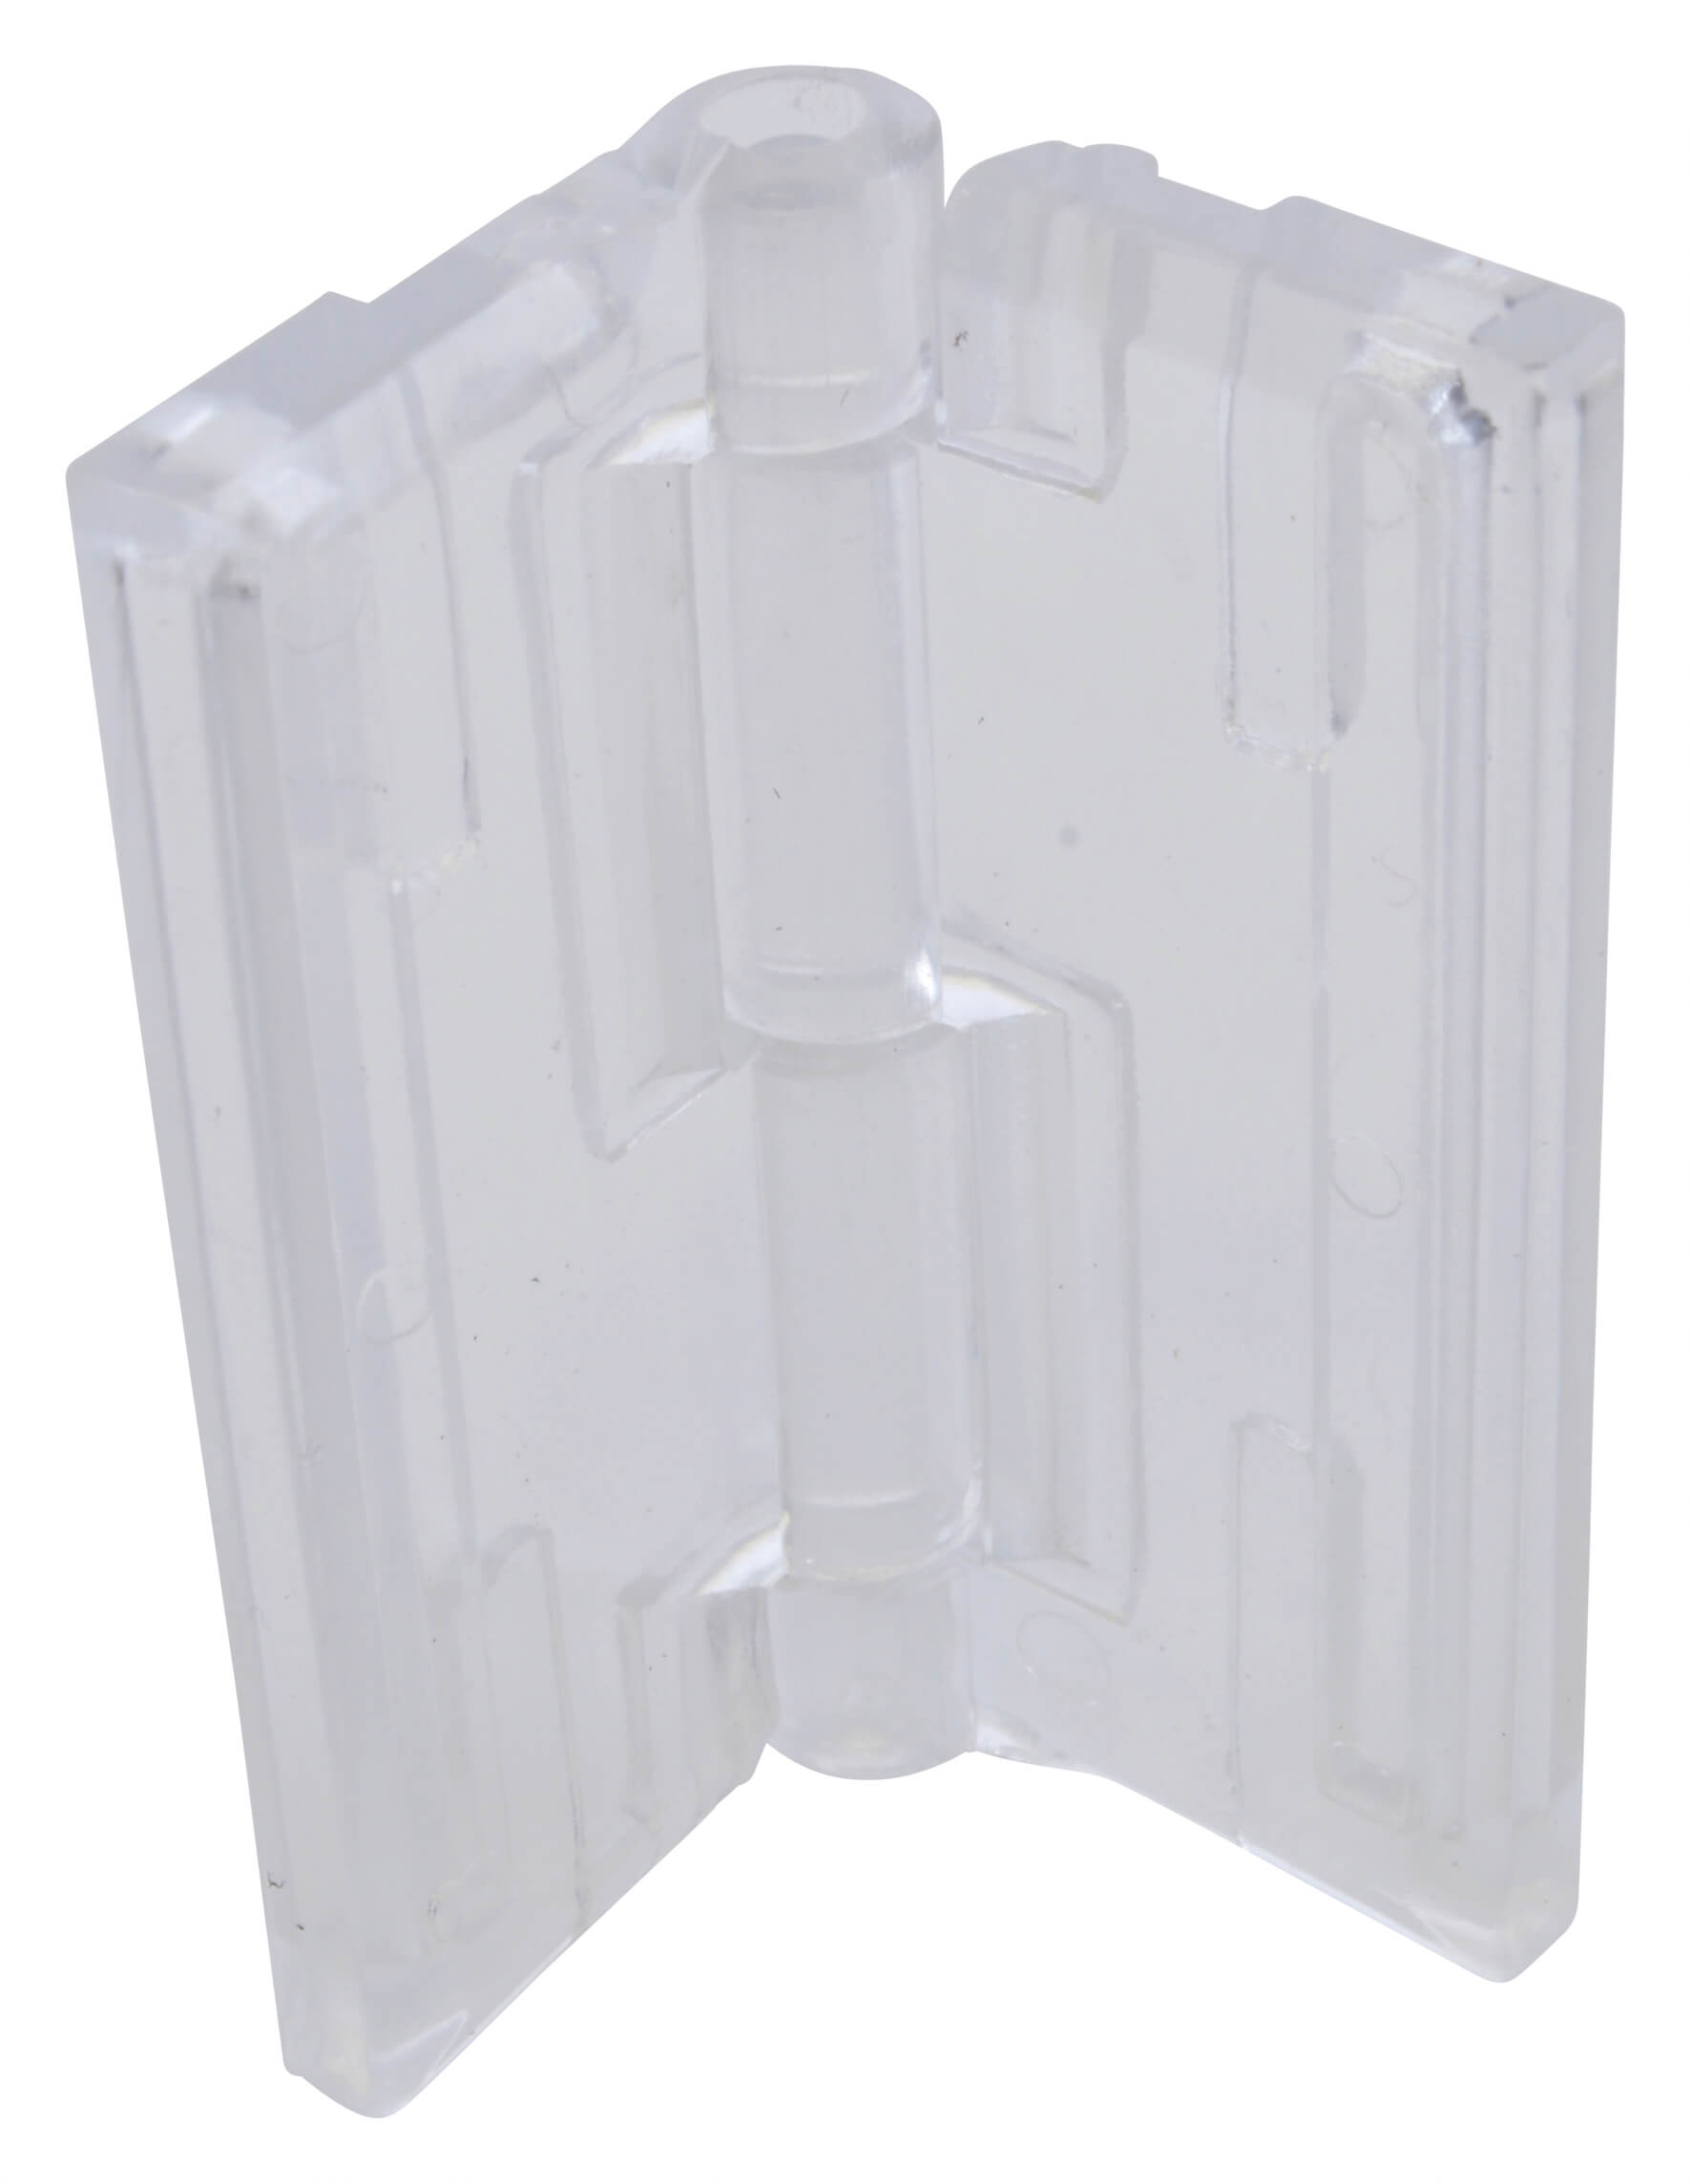 Clear Acrylic Standard Hinge 45 x 39mm - Pack of 10